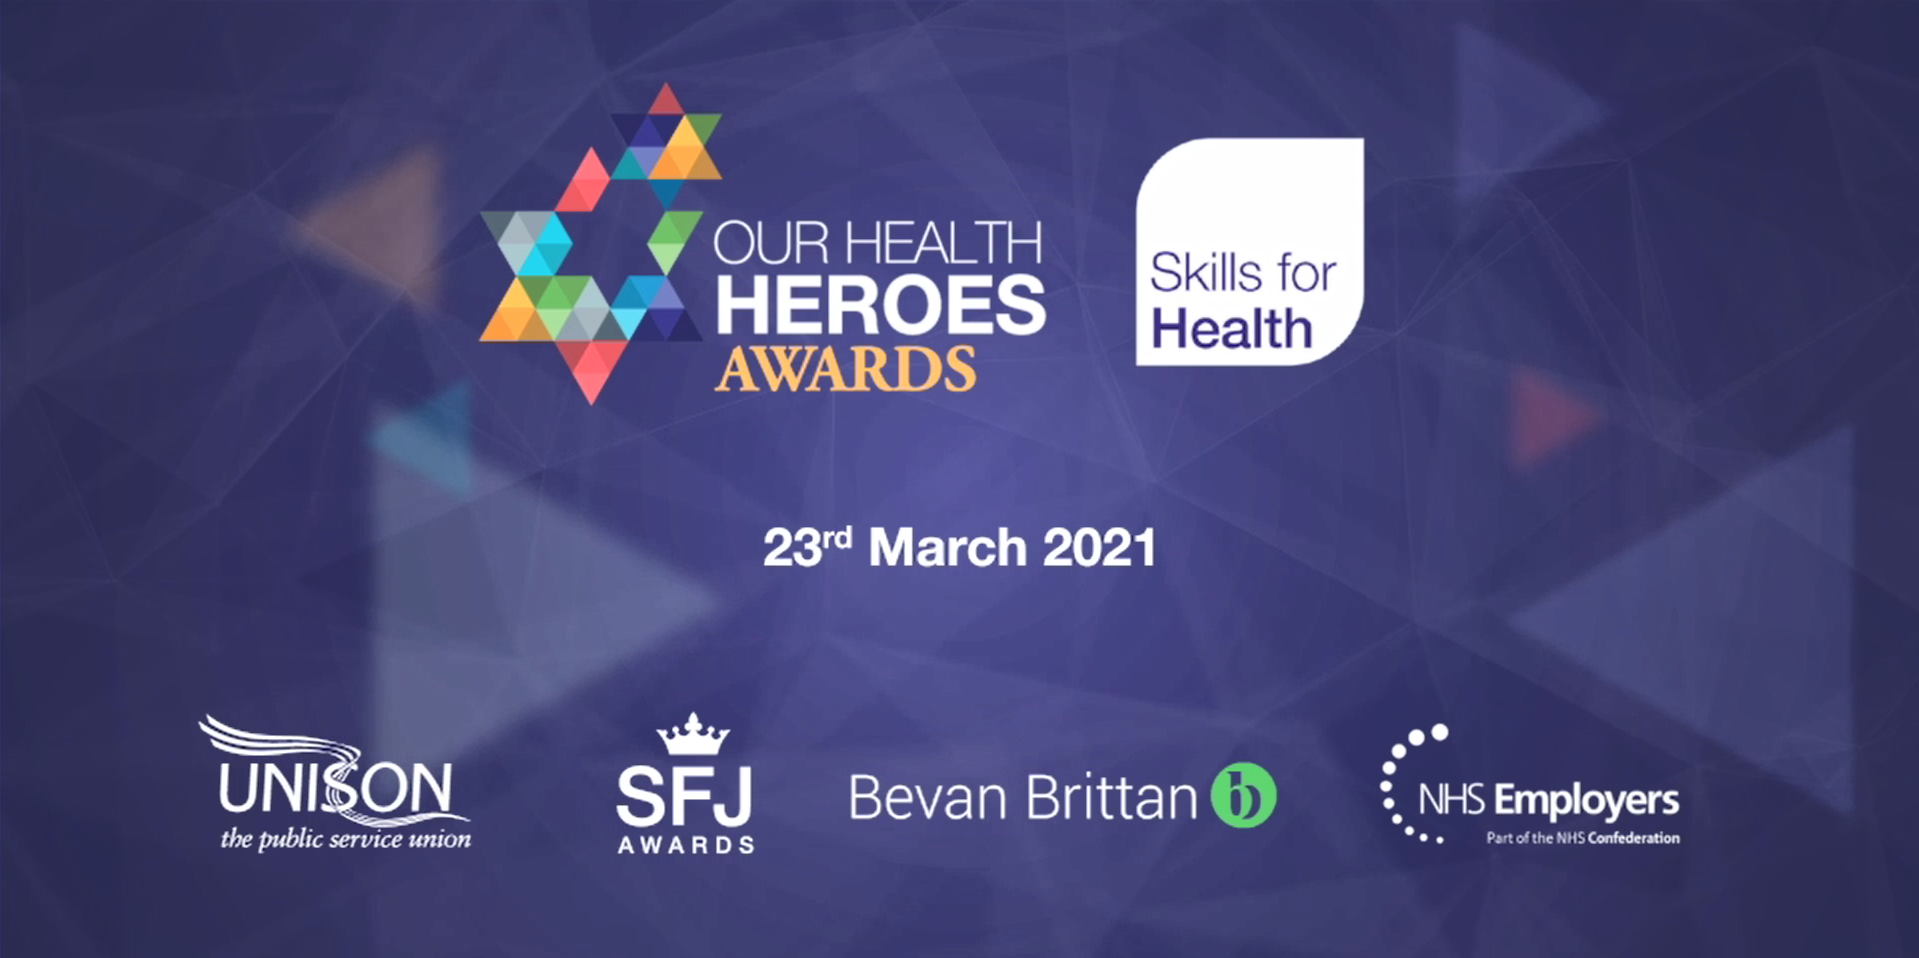 Our Health Heroes Awards 2021 | Skills for Health